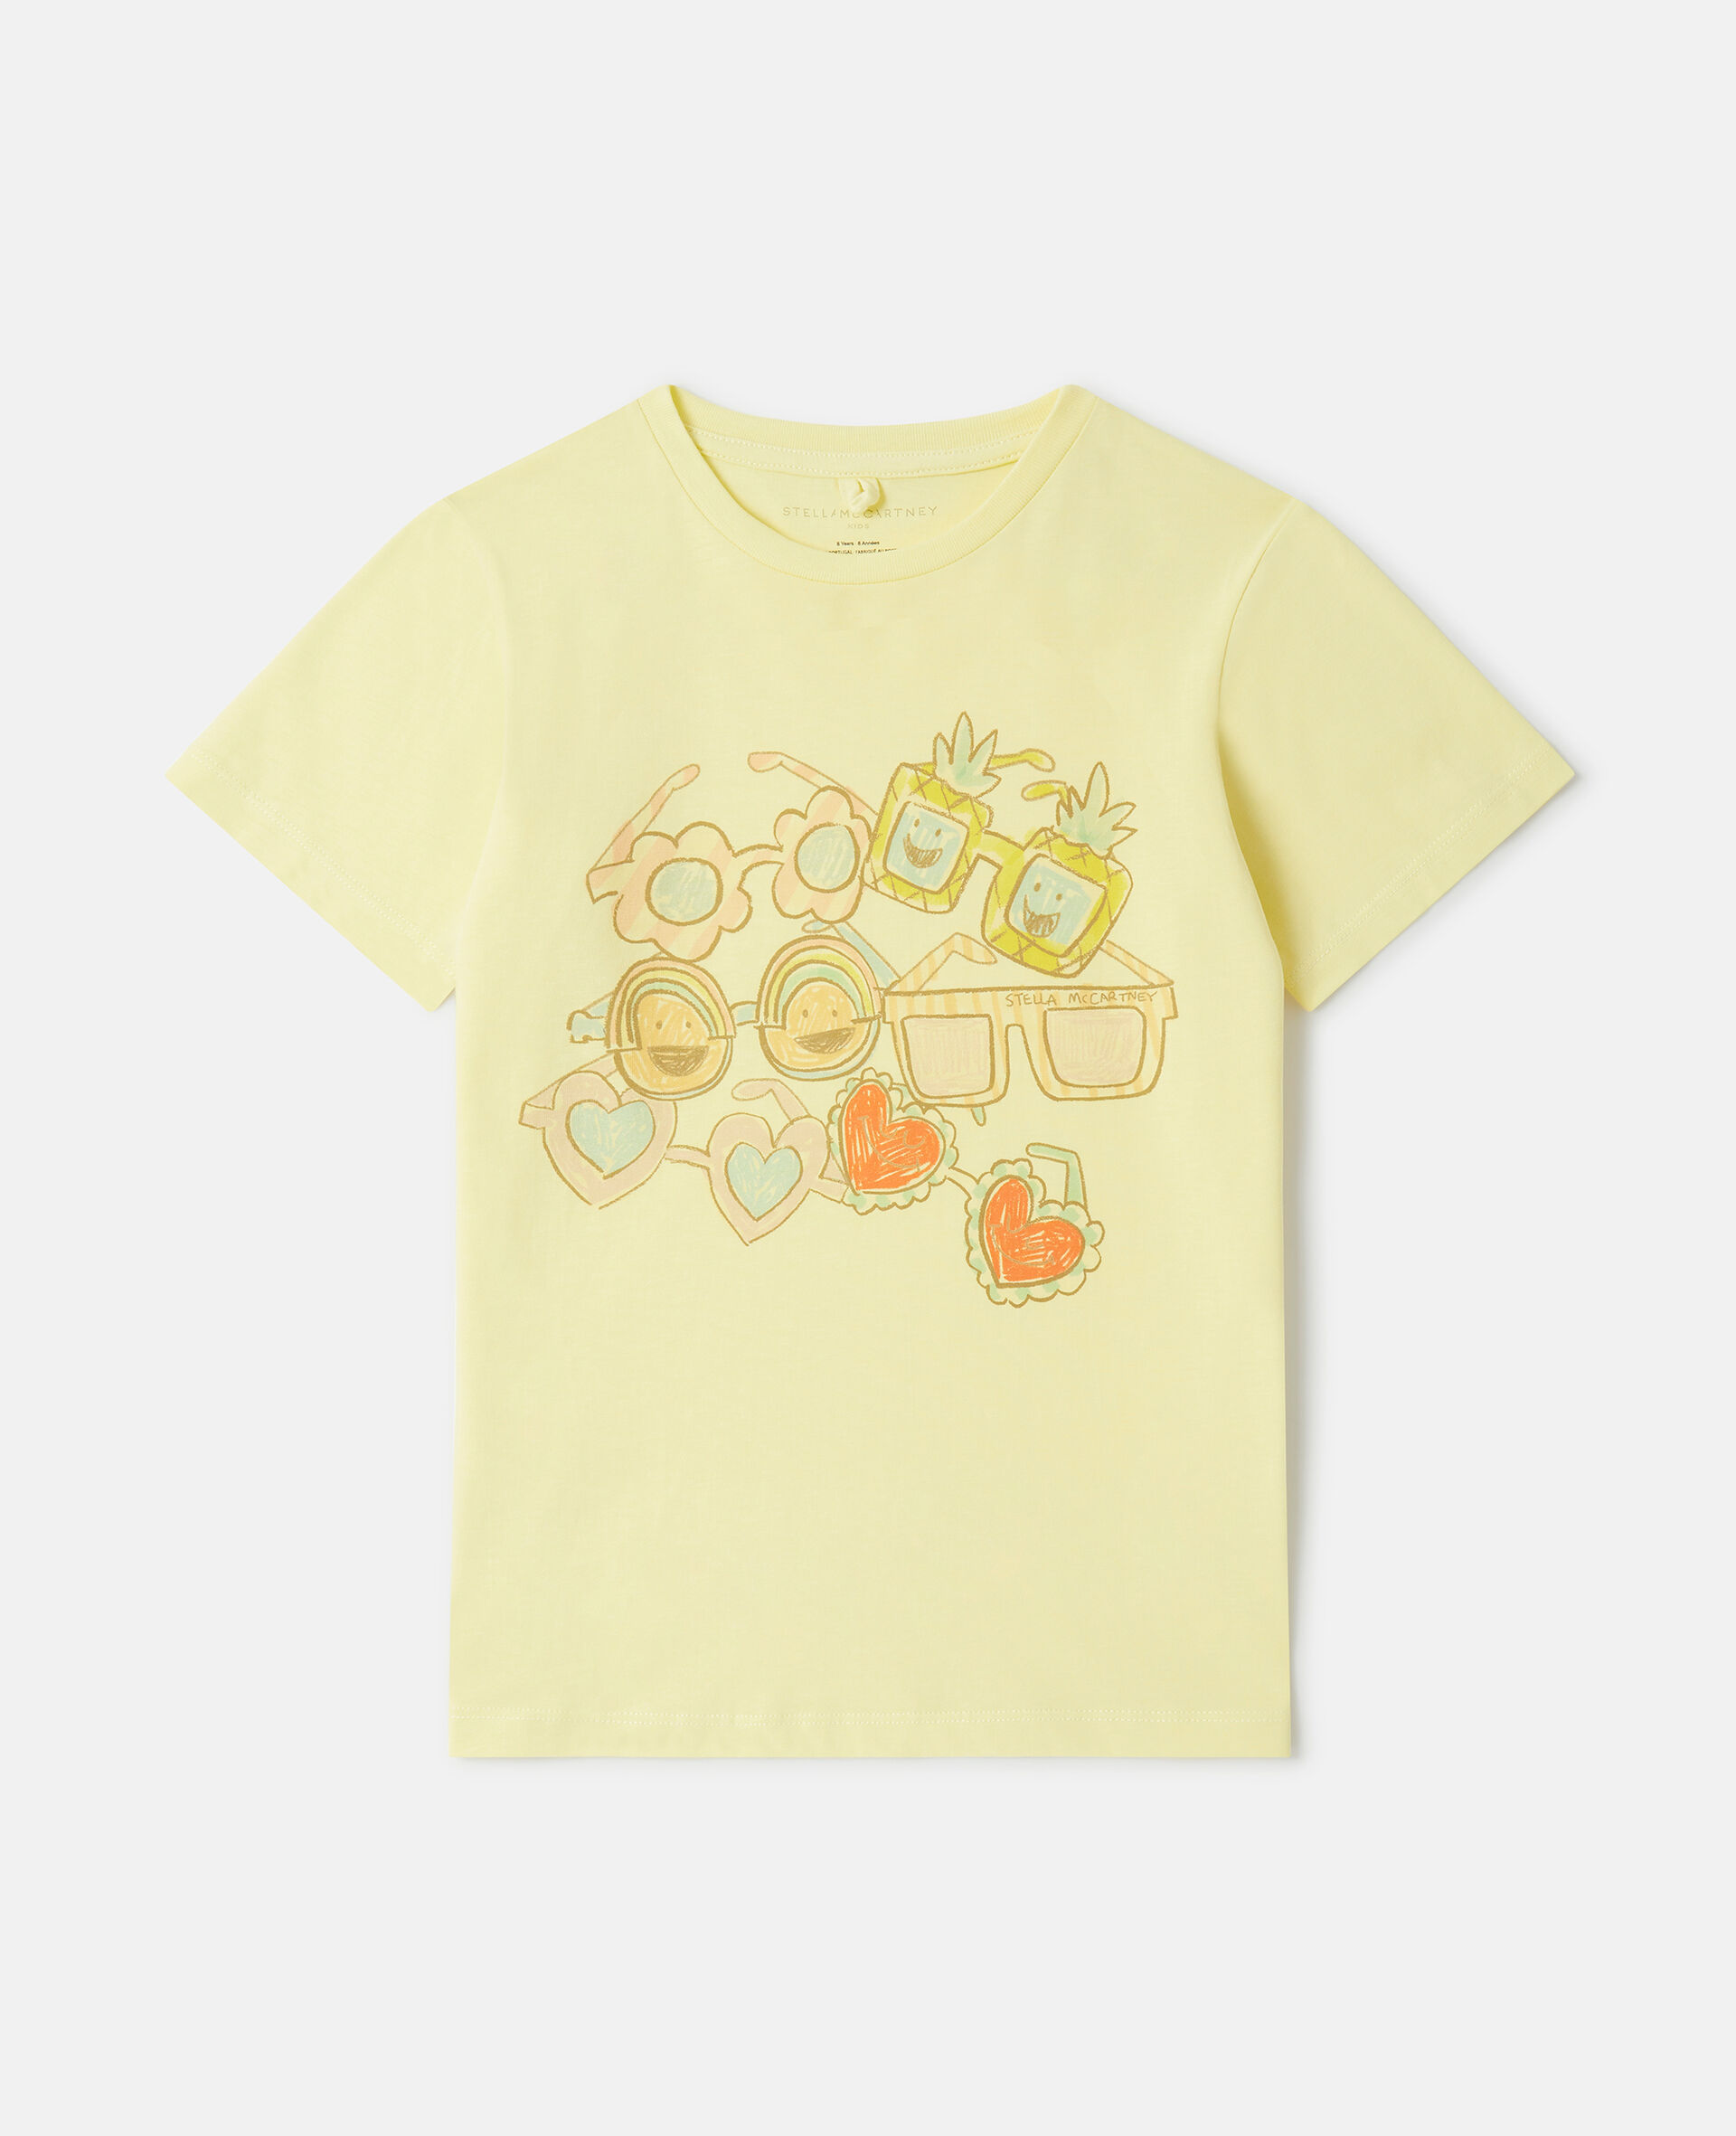 Sunglasses Doodle T-Shirt-Giallo-large image number 0